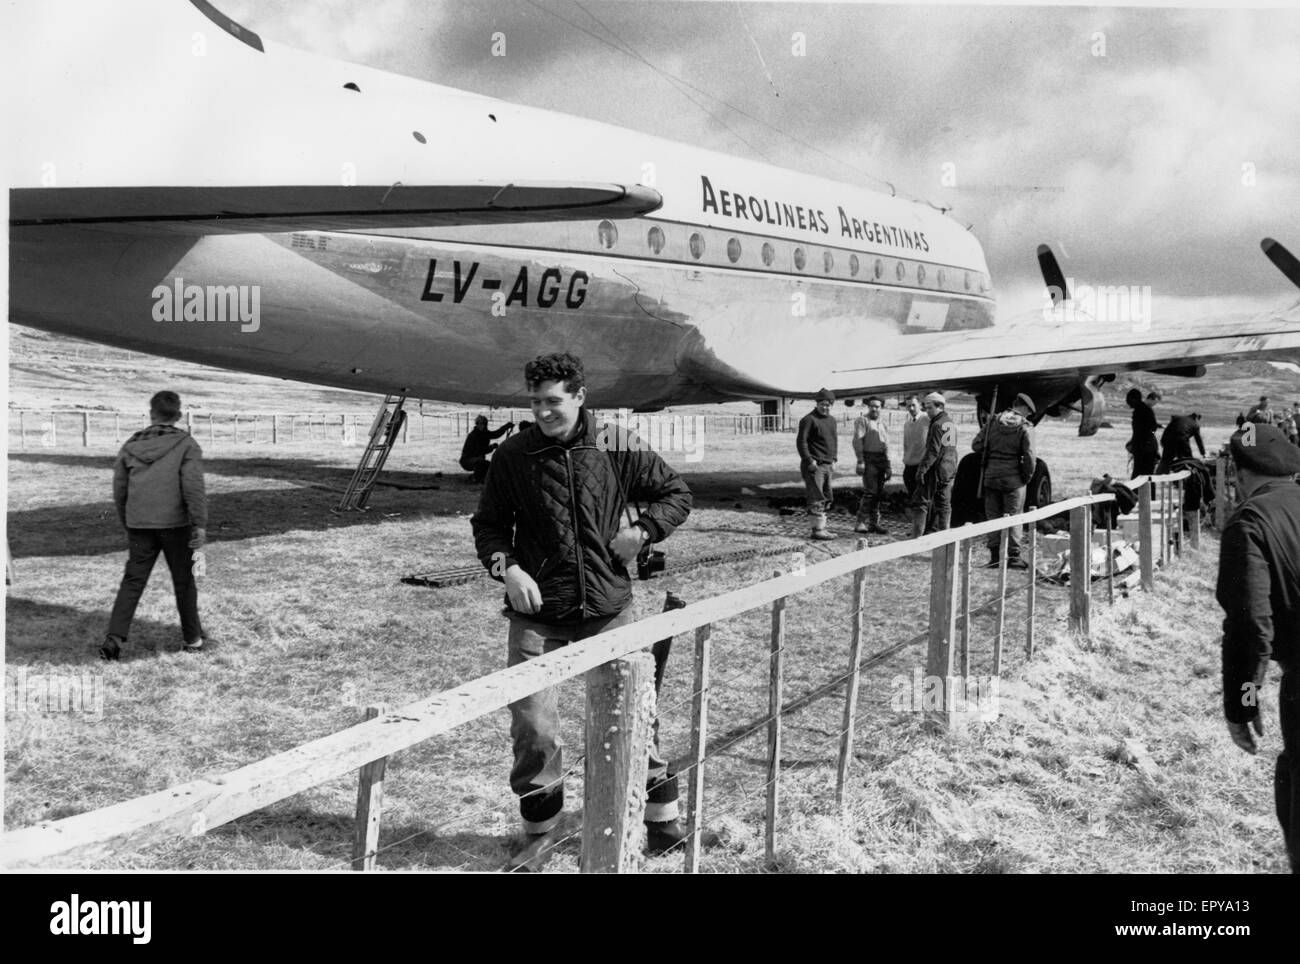 The aircraft used during a failed Argentine mini 'invasion' in 1966,the Falkland Islands, a British Overseas Territory in the South Atlantic Ocean. Stock Photo